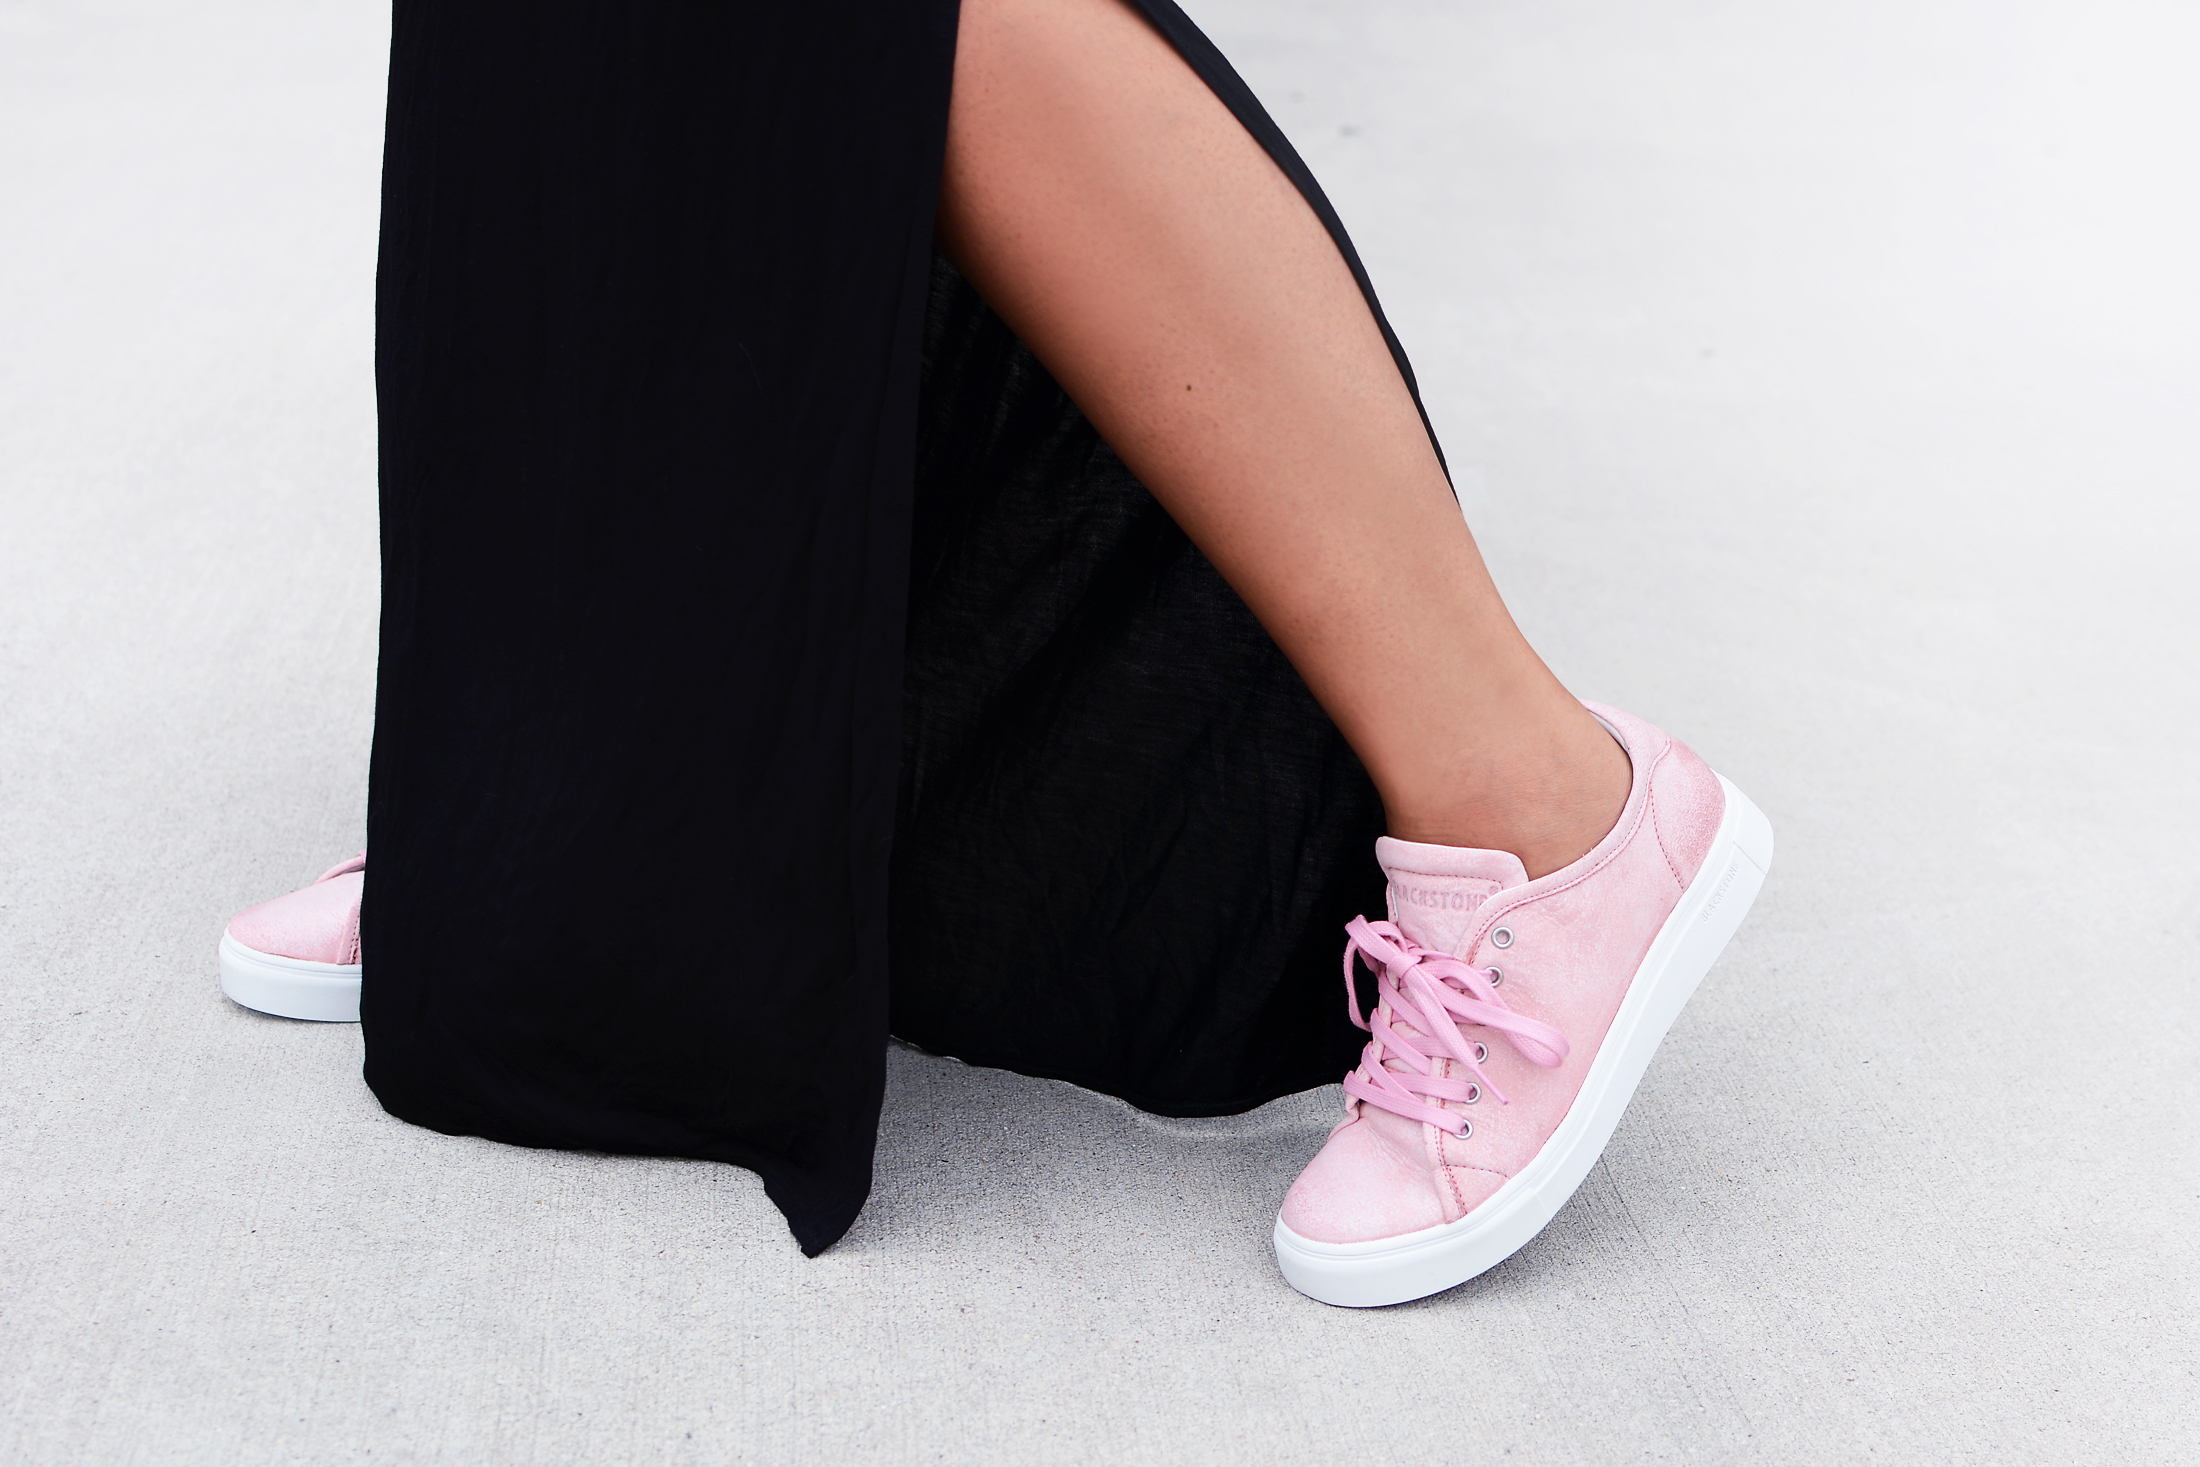 A NEW OBSESSION, PINK SNEAKERS